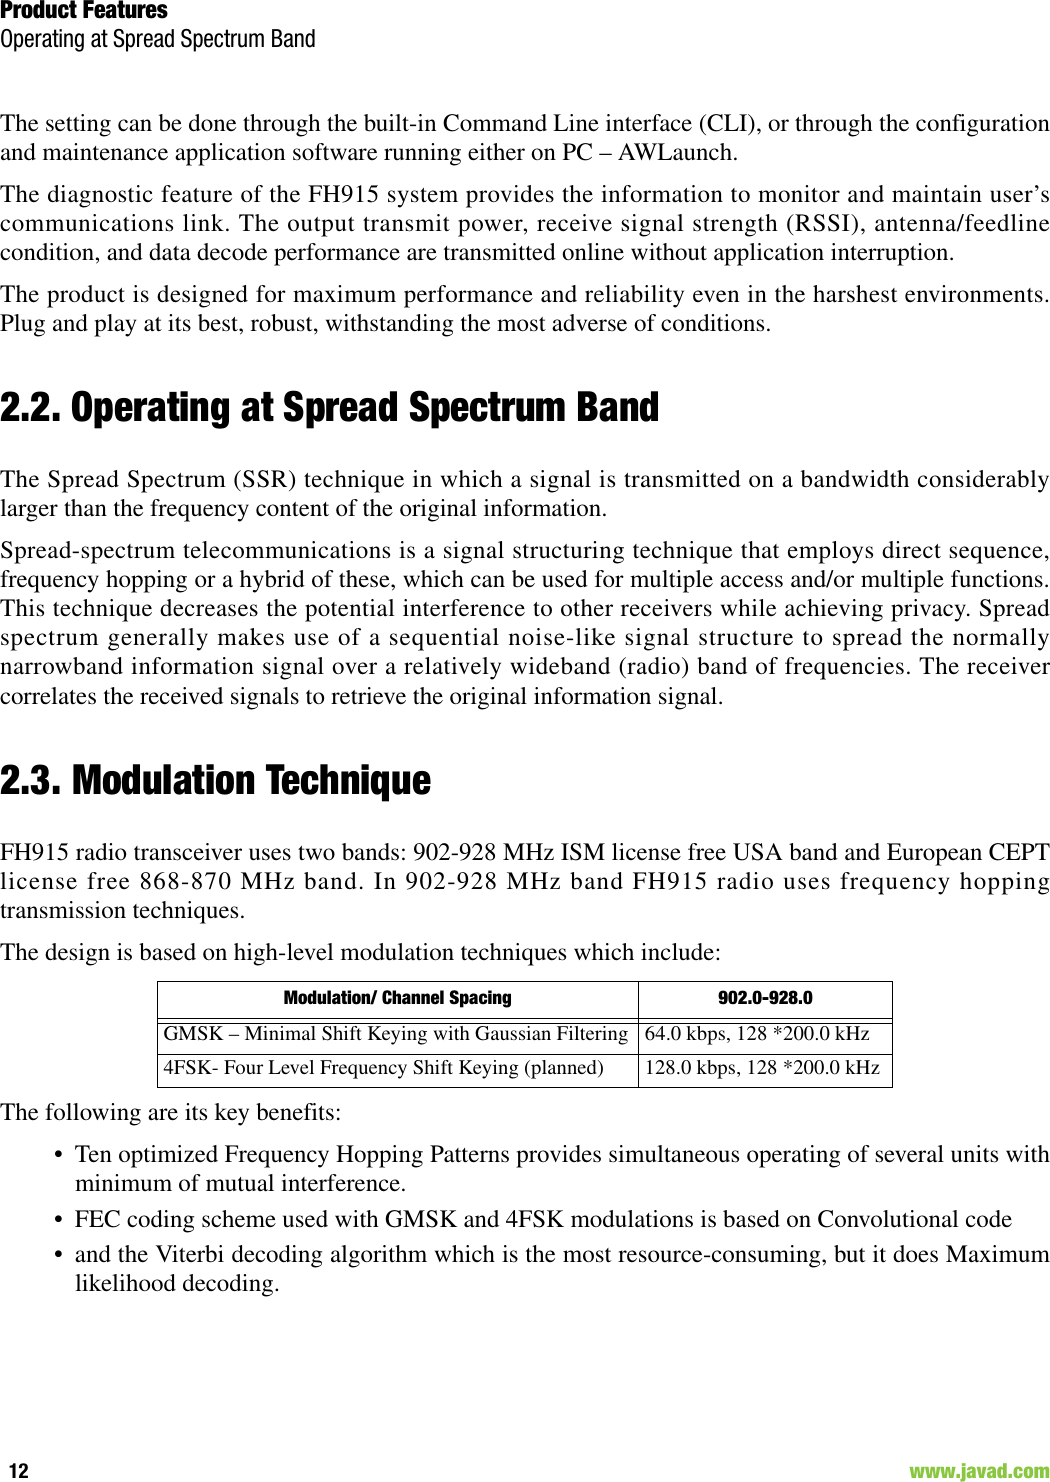 Product FeaturesOperating at Spread Spectrum Band12                                                                                                                     www.javad.comThe setting can be done through the built-in Command Line interface (CLI), or through the configurationand maintenance application software running either on PC – AWLaunch.The diagnostic feature of the FH915 system provides the information to monitor and maintain user’scommunications link. The output transmit power, receive signal strength (RSSI), antenna/feedlinecondition, and data decode performance are transmitted online without application interruption. The product is designed for maximum performance and reliability even in the harshest environments.Plug and play at its best, robust, withstanding the most adverse of conditions.2.2. Operating at Spread Spectrum BandThe Spread Spectrum (SSR) technique in which a signal is transmitted on a bandwidth considerablylarger than the frequency content of the original information.Spread-spectrum telecommunications is a signal structuring technique that employs direct sequence,frequency hopping or a hybrid of these, which can be used for multiple access and/or multiple functions.This technique decreases the potential interference to other receivers while achieving privacy. Spreadspectrum generally makes use of a sequential noise-like signal structure to spread the normallynarrowband information signal over a relatively wideband (radio) band of frequencies. The receivercorrelates the received signals to retrieve the original information signal. 2.3. Modulation TechniqueFH915 radio transceiver uses two bands: 902-928 MHz ISM license free USA band and European CEPTlicense free 868-870 MHz band. In 902-928 MHz band FH915 radio uses frequency hoppingtransmission techniques.The design is based on high-level modulation techniques which include:The following are its key benefits:• Ten optimized Frequency Hopping Patterns provides simultaneous operating of several units withminimum of mutual interference. • FEC coding scheme used with GMSK and 4FSK modulations is based on Convolutional code • and the Viterbi decoding algorithm which is the most resource-consuming, but it does Maximumlikelihood decoding. Modulation/ Channel Spacing 902.0-928.0GMSK – Minimal Shift Keying with Gaussian Filtering 64.0 kbps, 128 *200.0 kHz4FSK- Four Level Frequency Shift Keying (planned) 128.0 kbps, 128 *200.0 kHz